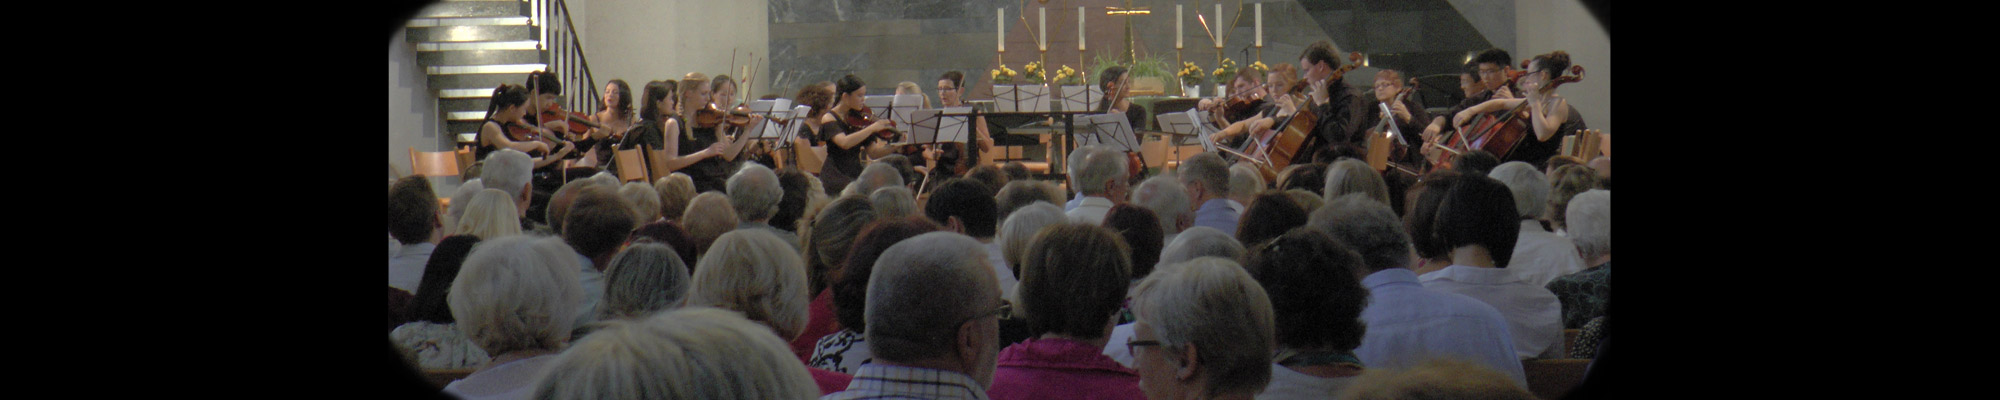 classical music festival orchestra concert